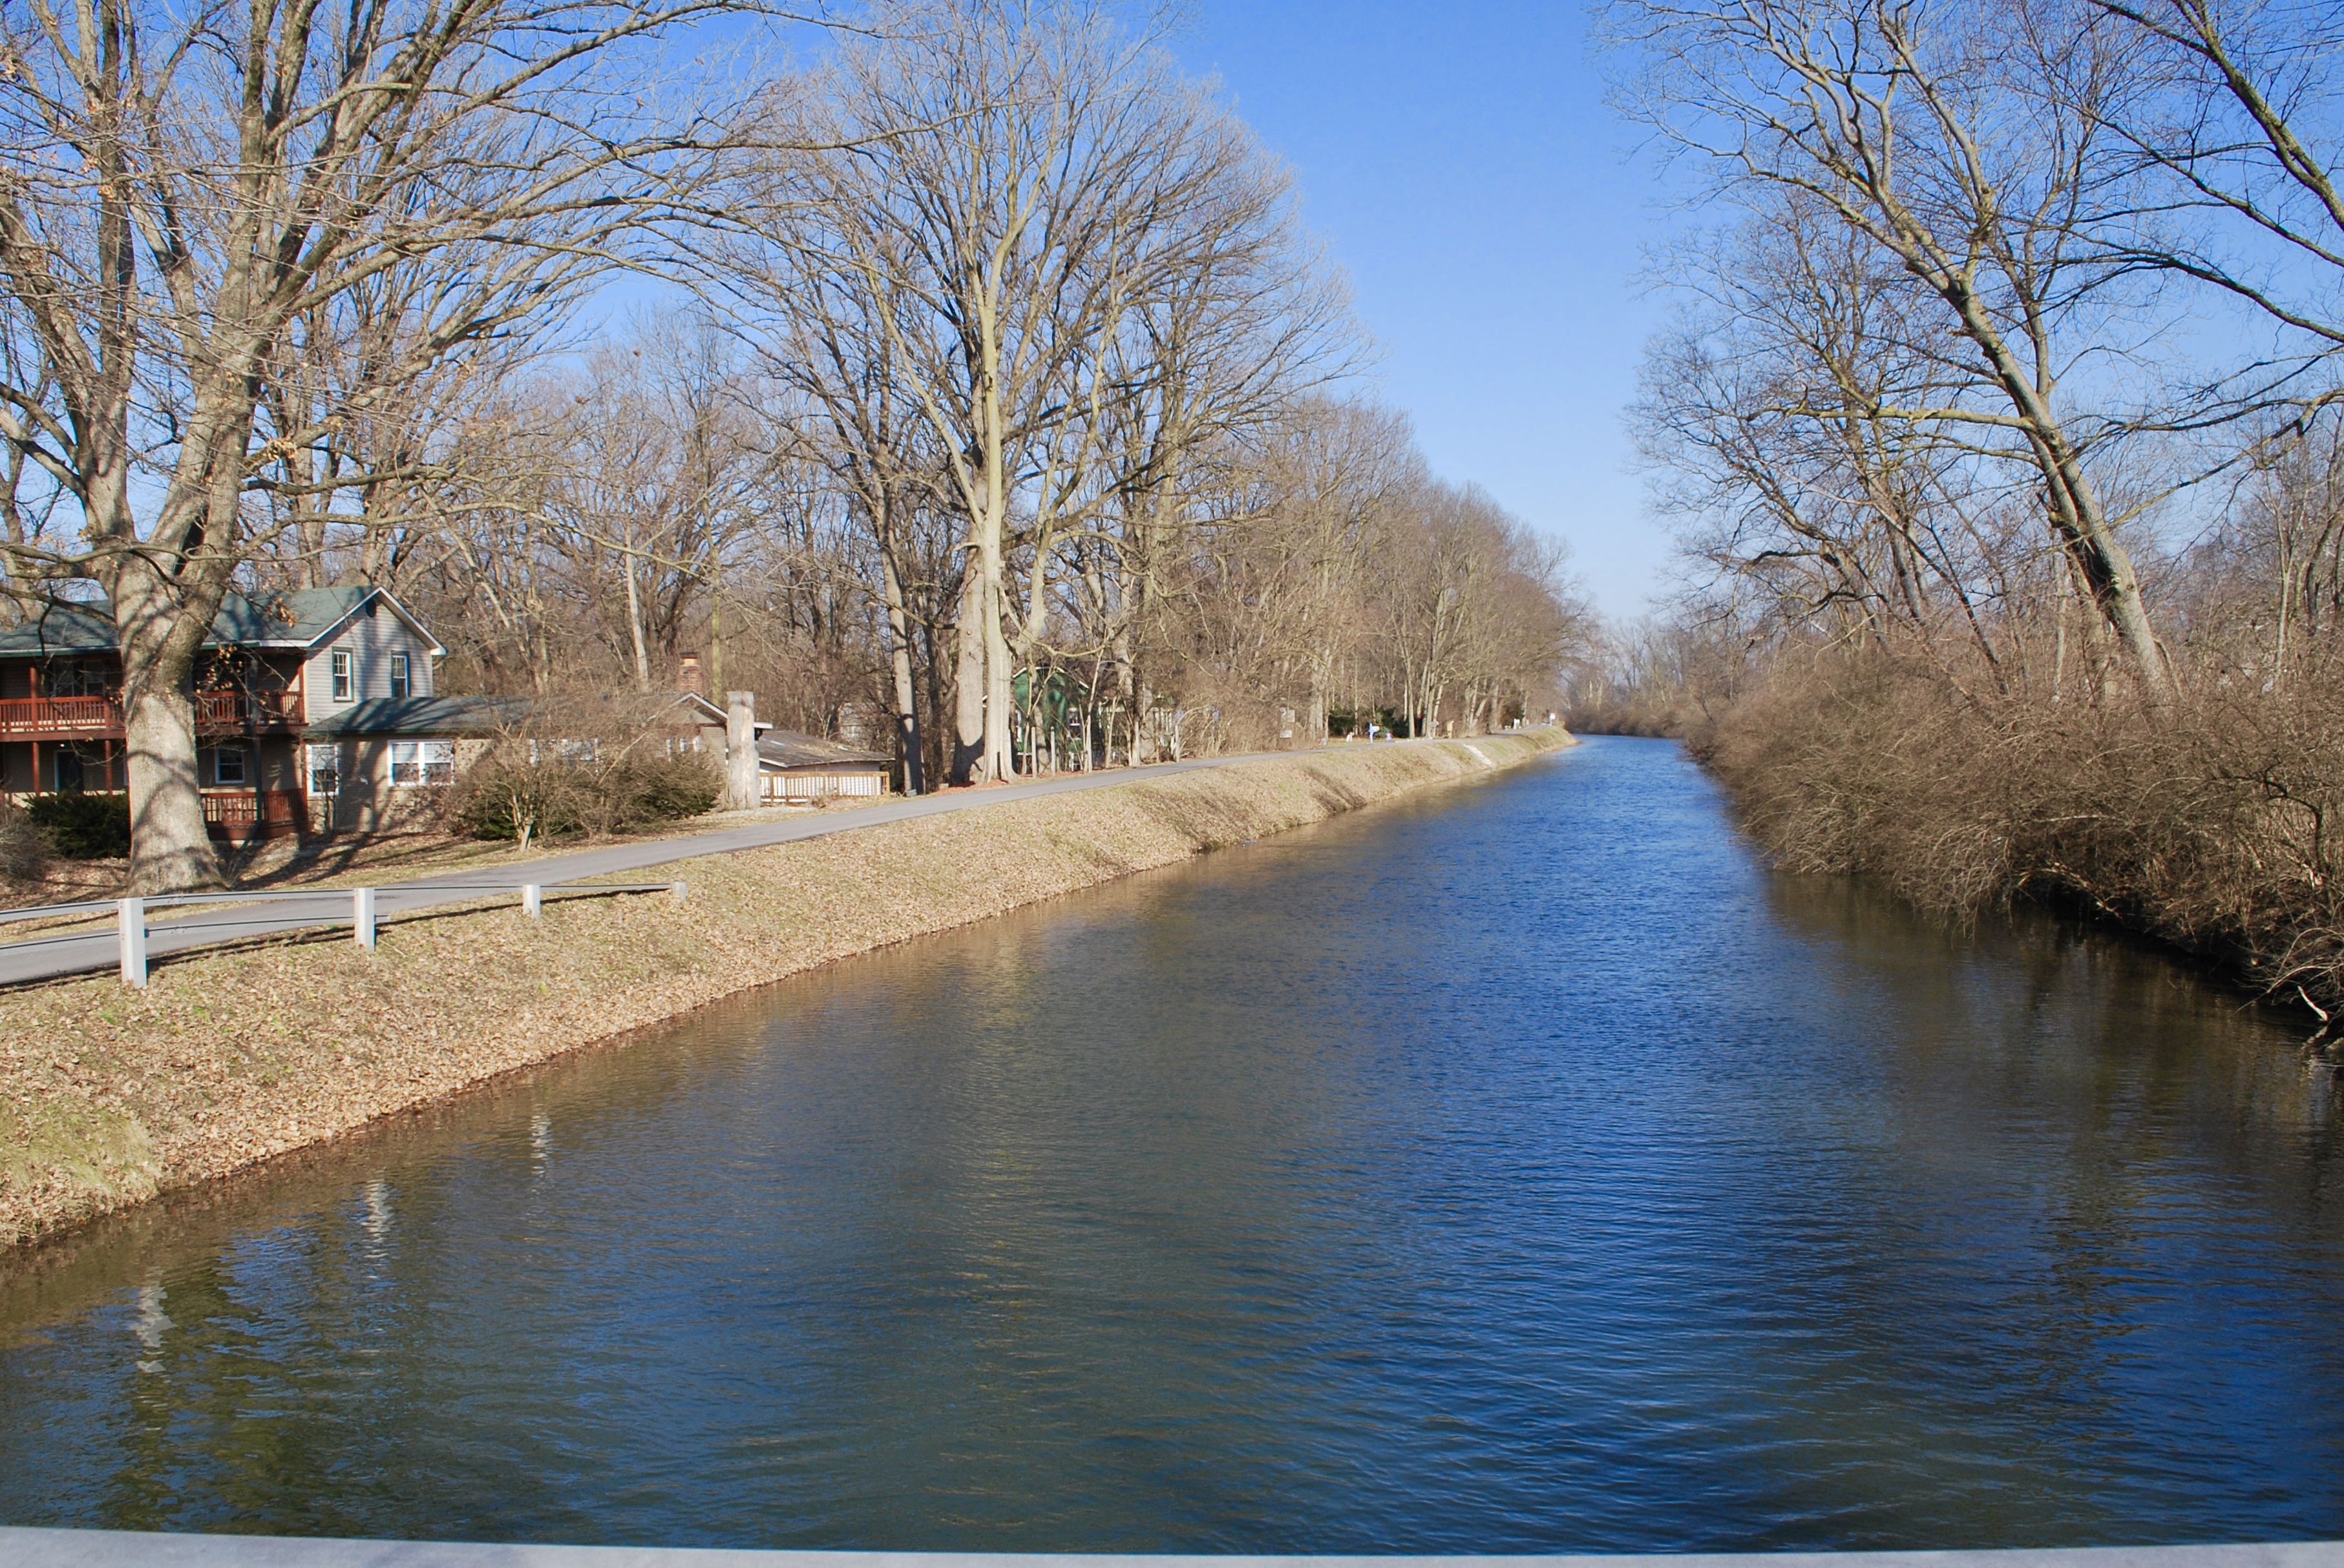 A view of a canal with houses on one side.